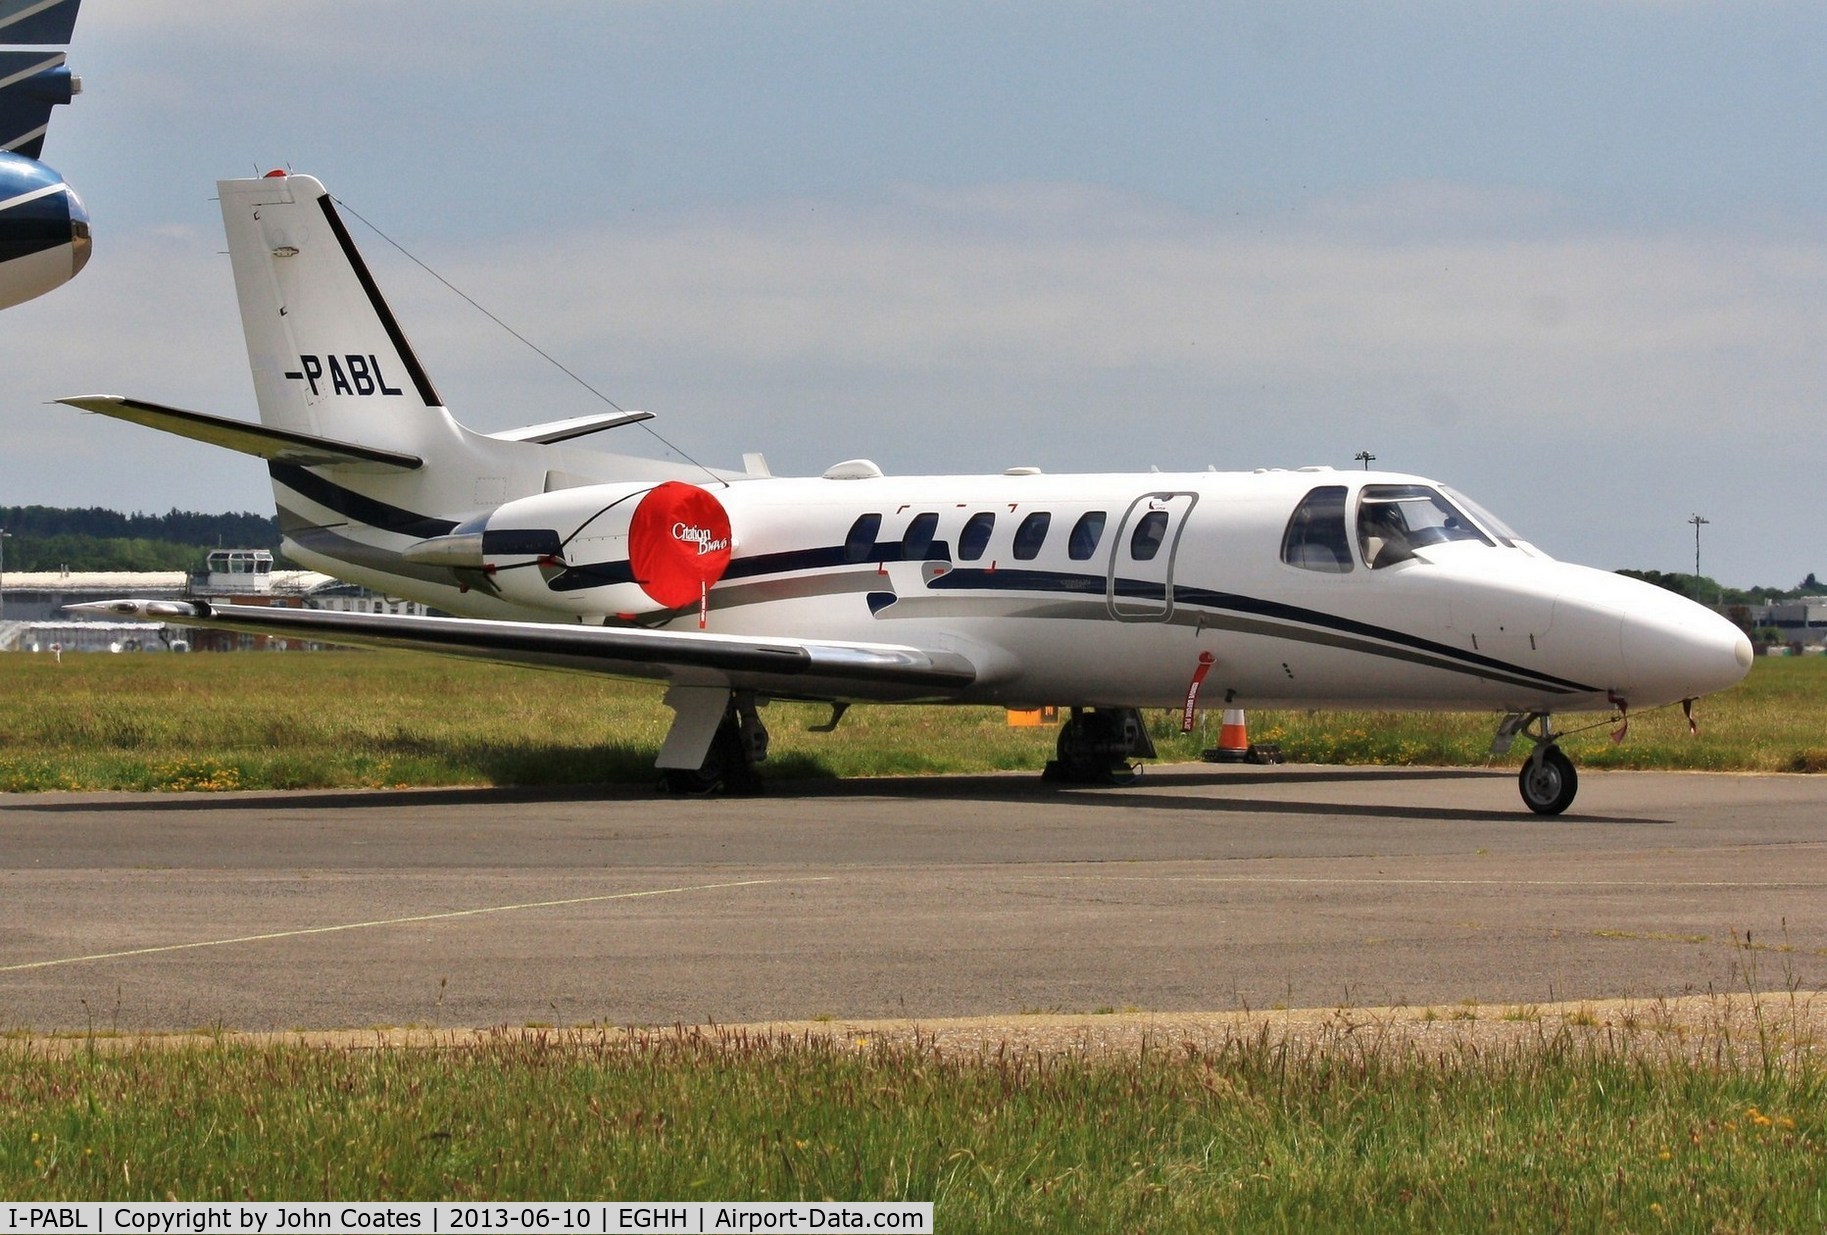 I-PABL, 2004 Cessna 550 Citation Bravo C/N 550-1083, About to become G-PABL